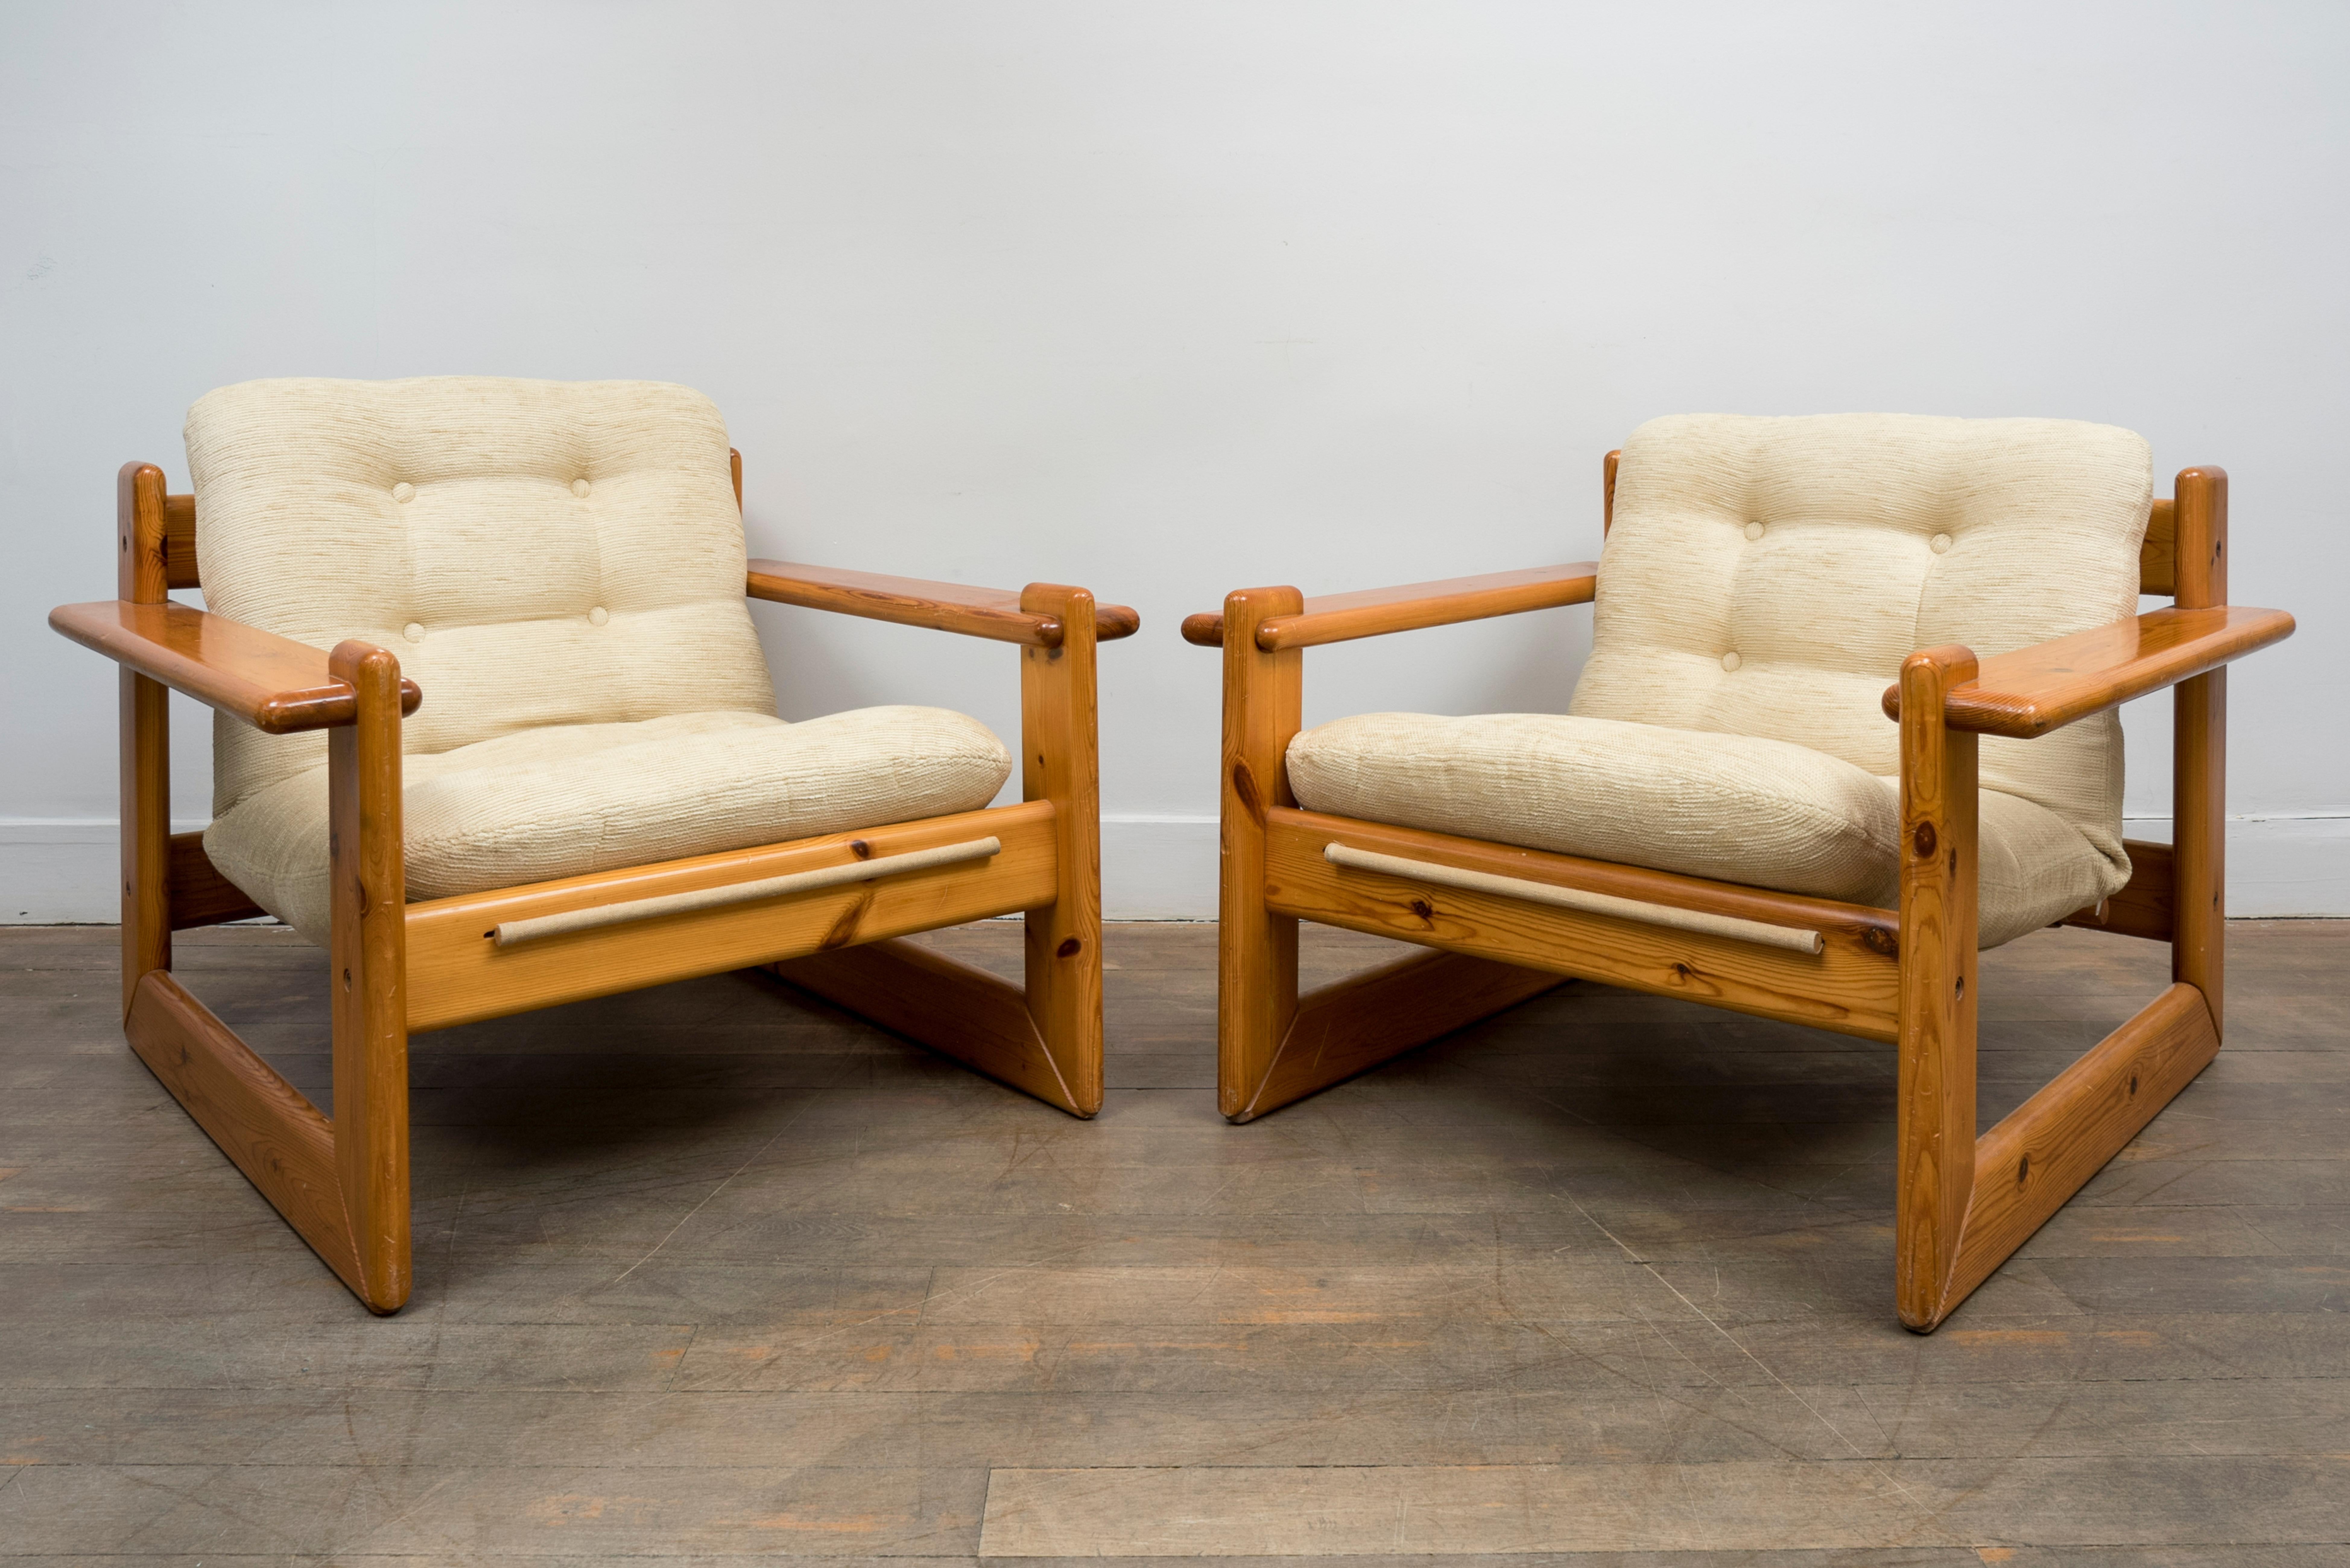 Pair of lounge chairs
Varnished pinewood
Original fabric in very good condition
France, 1960s

Measures: Height 26.4 in. (67 cm)
Width 32.6 in. (83 cm)
Depth 32.6 in. (83 cm)
Height seat 15.3 in. (39 cm).
 